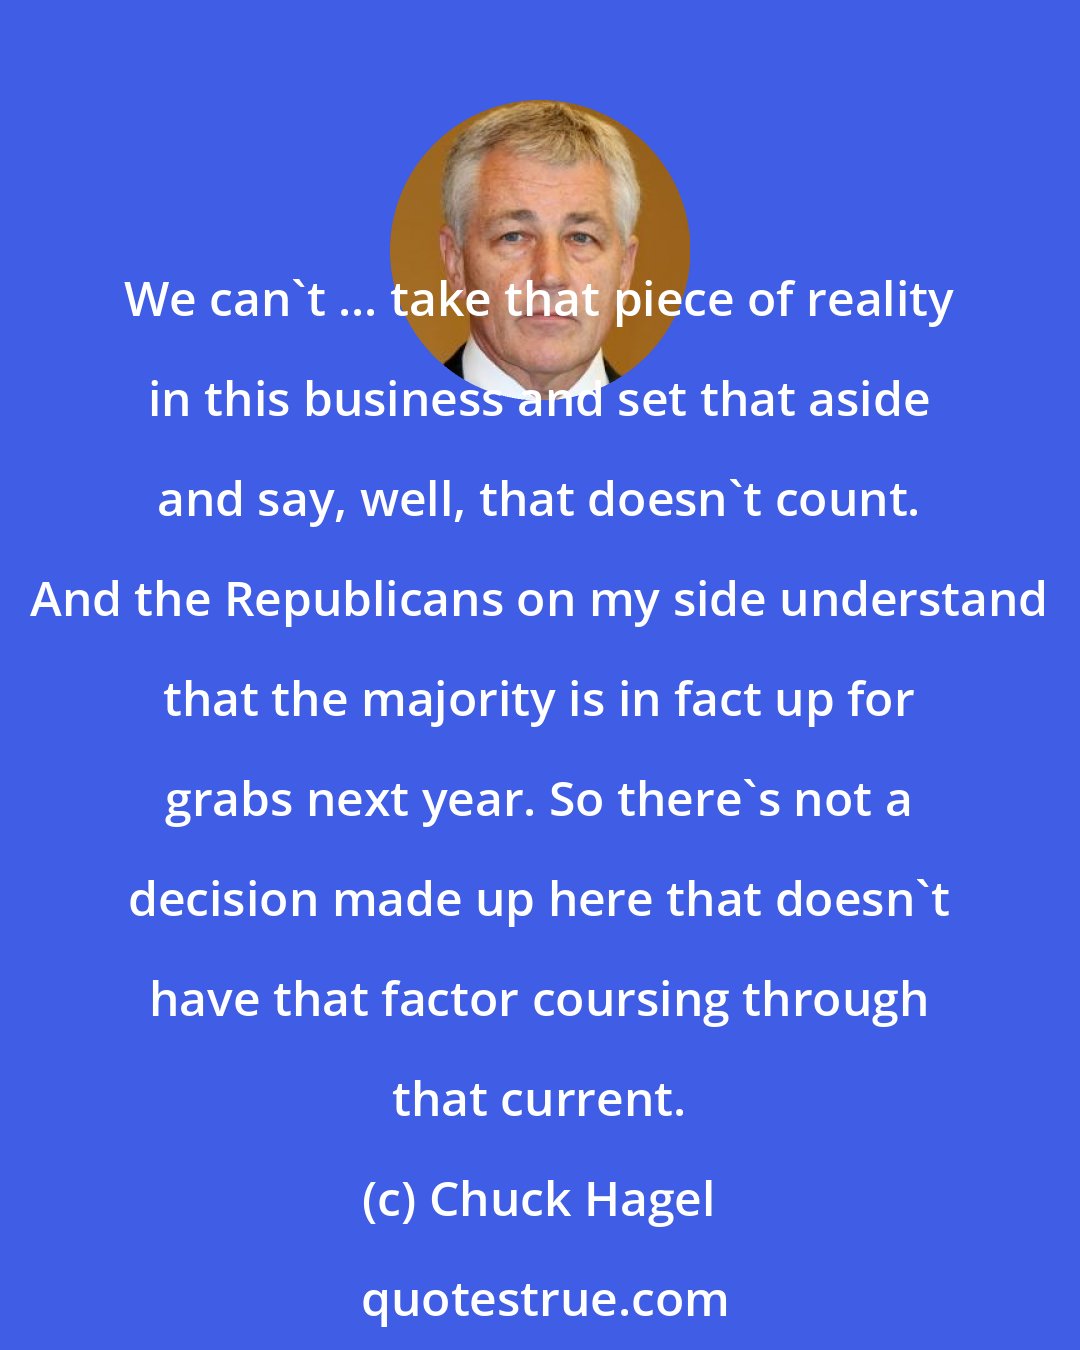 Chuck Hagel: We can't ... take that piece of reality in this business and set that aside and say, well, that doesn't count. And the Republicans on my side understand that the majority is in fact up for grabs next year. So there's not a decision made up here that doesn't have that factor coursing through that current.